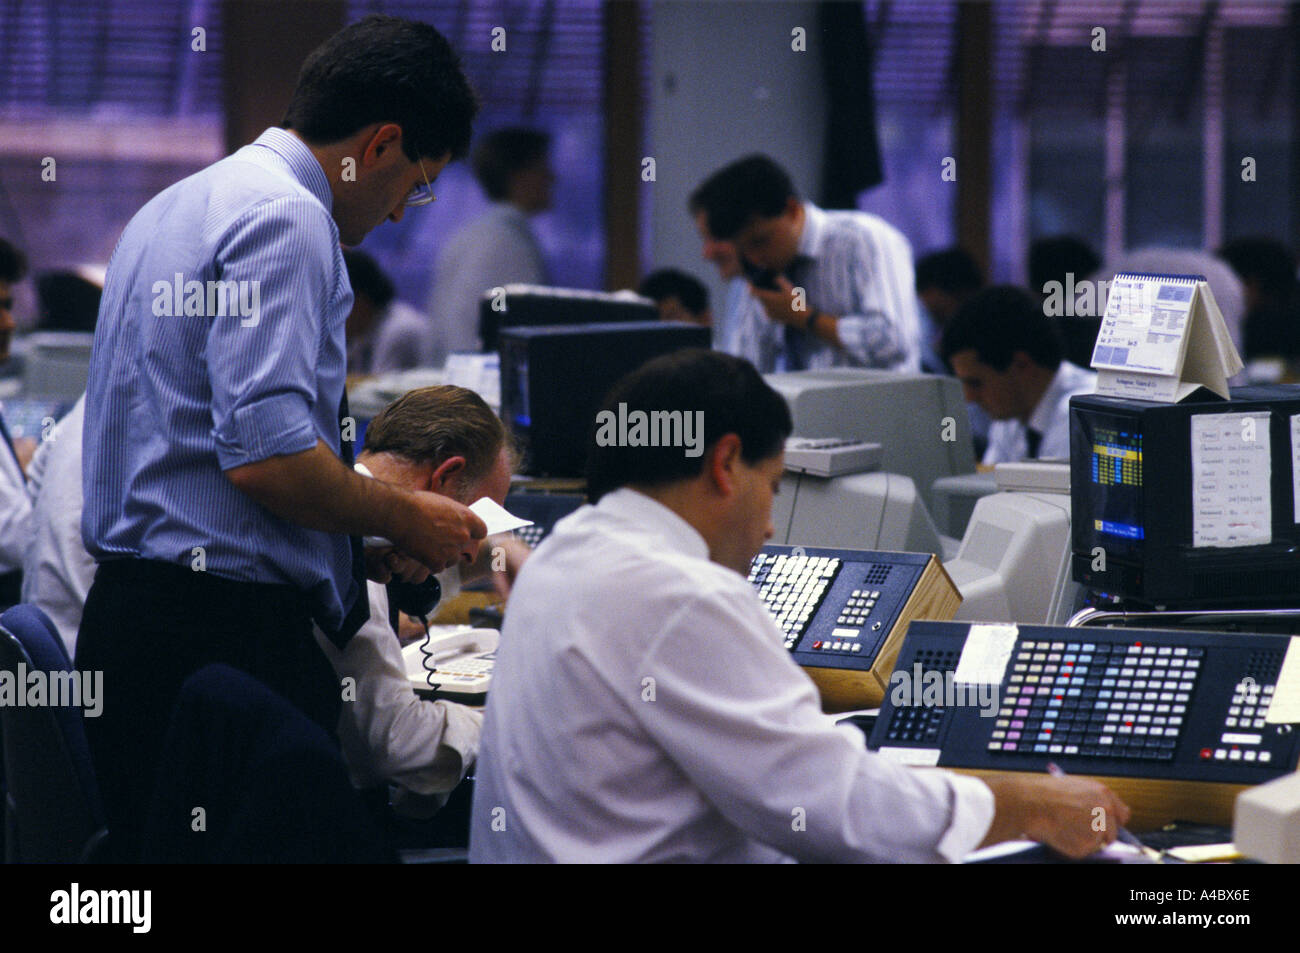 BROKERS AT CITICORP SCRIMGEOUR VICKERS DEALING ROOM. LONDON ON BLACK MONDAY 17 OCT 1987 - STOCK MARKET CRASH. Stock Photo